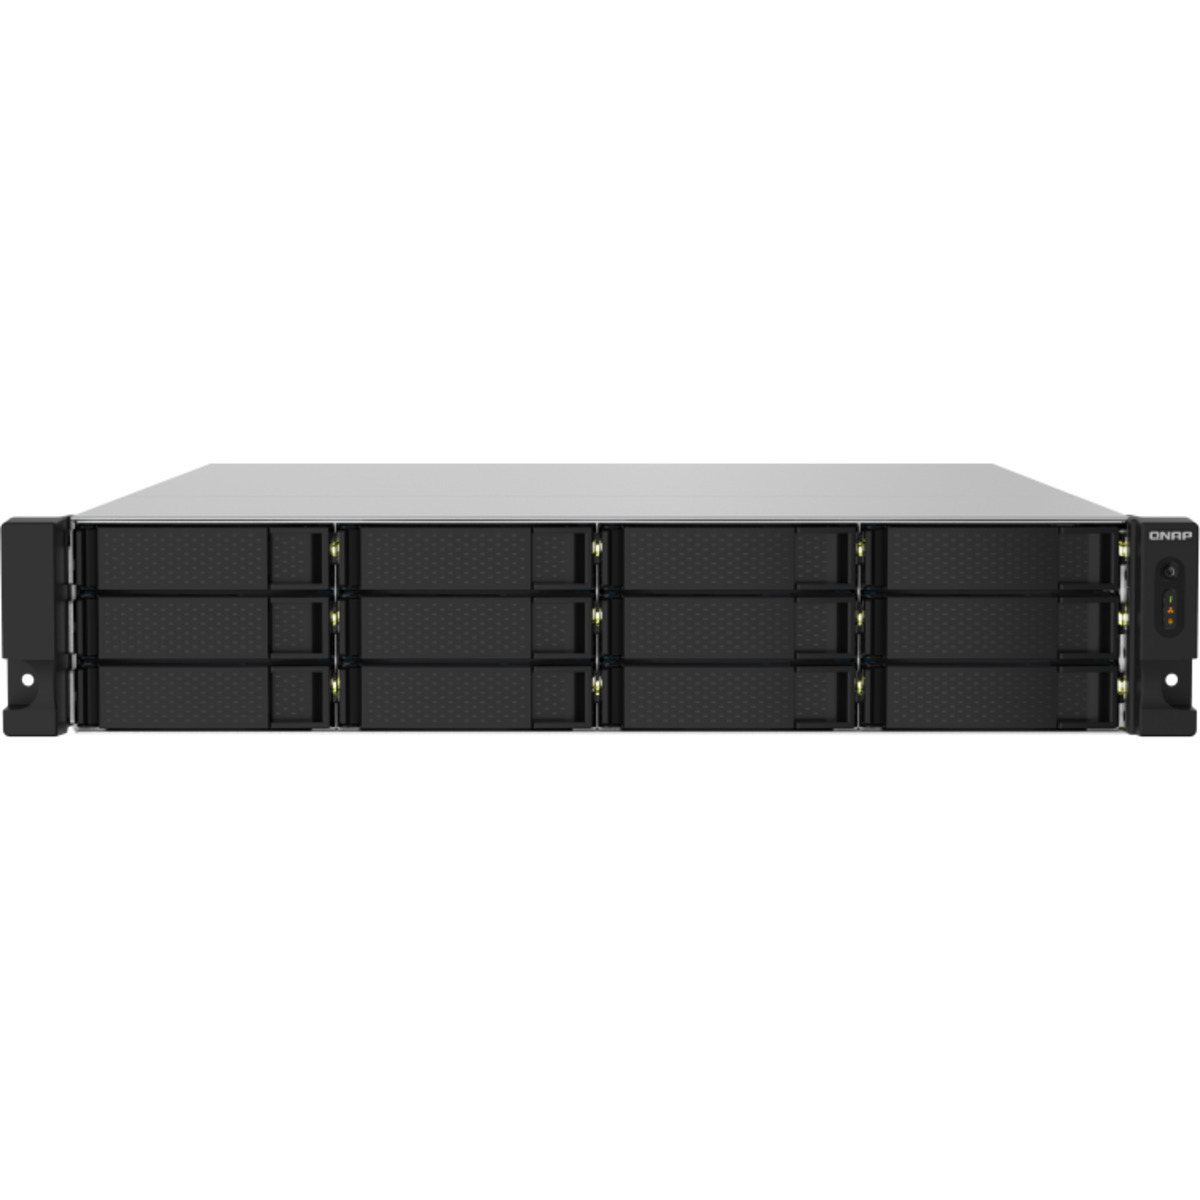 QNAP TS-1232PXU-RP 42tb 12-Bay RackMount Personal / Basic Home / Small Office NAS - Network Attached Storage Device 7x6tb Western Digital Gold WD6003FRYZ 3.5 7200rpm SATA 6Gb/s HDD ENTERPRISE Class Drives Installed - Burn-In Tested - FREE RAM UPGRADE TS-1232PXU-RP